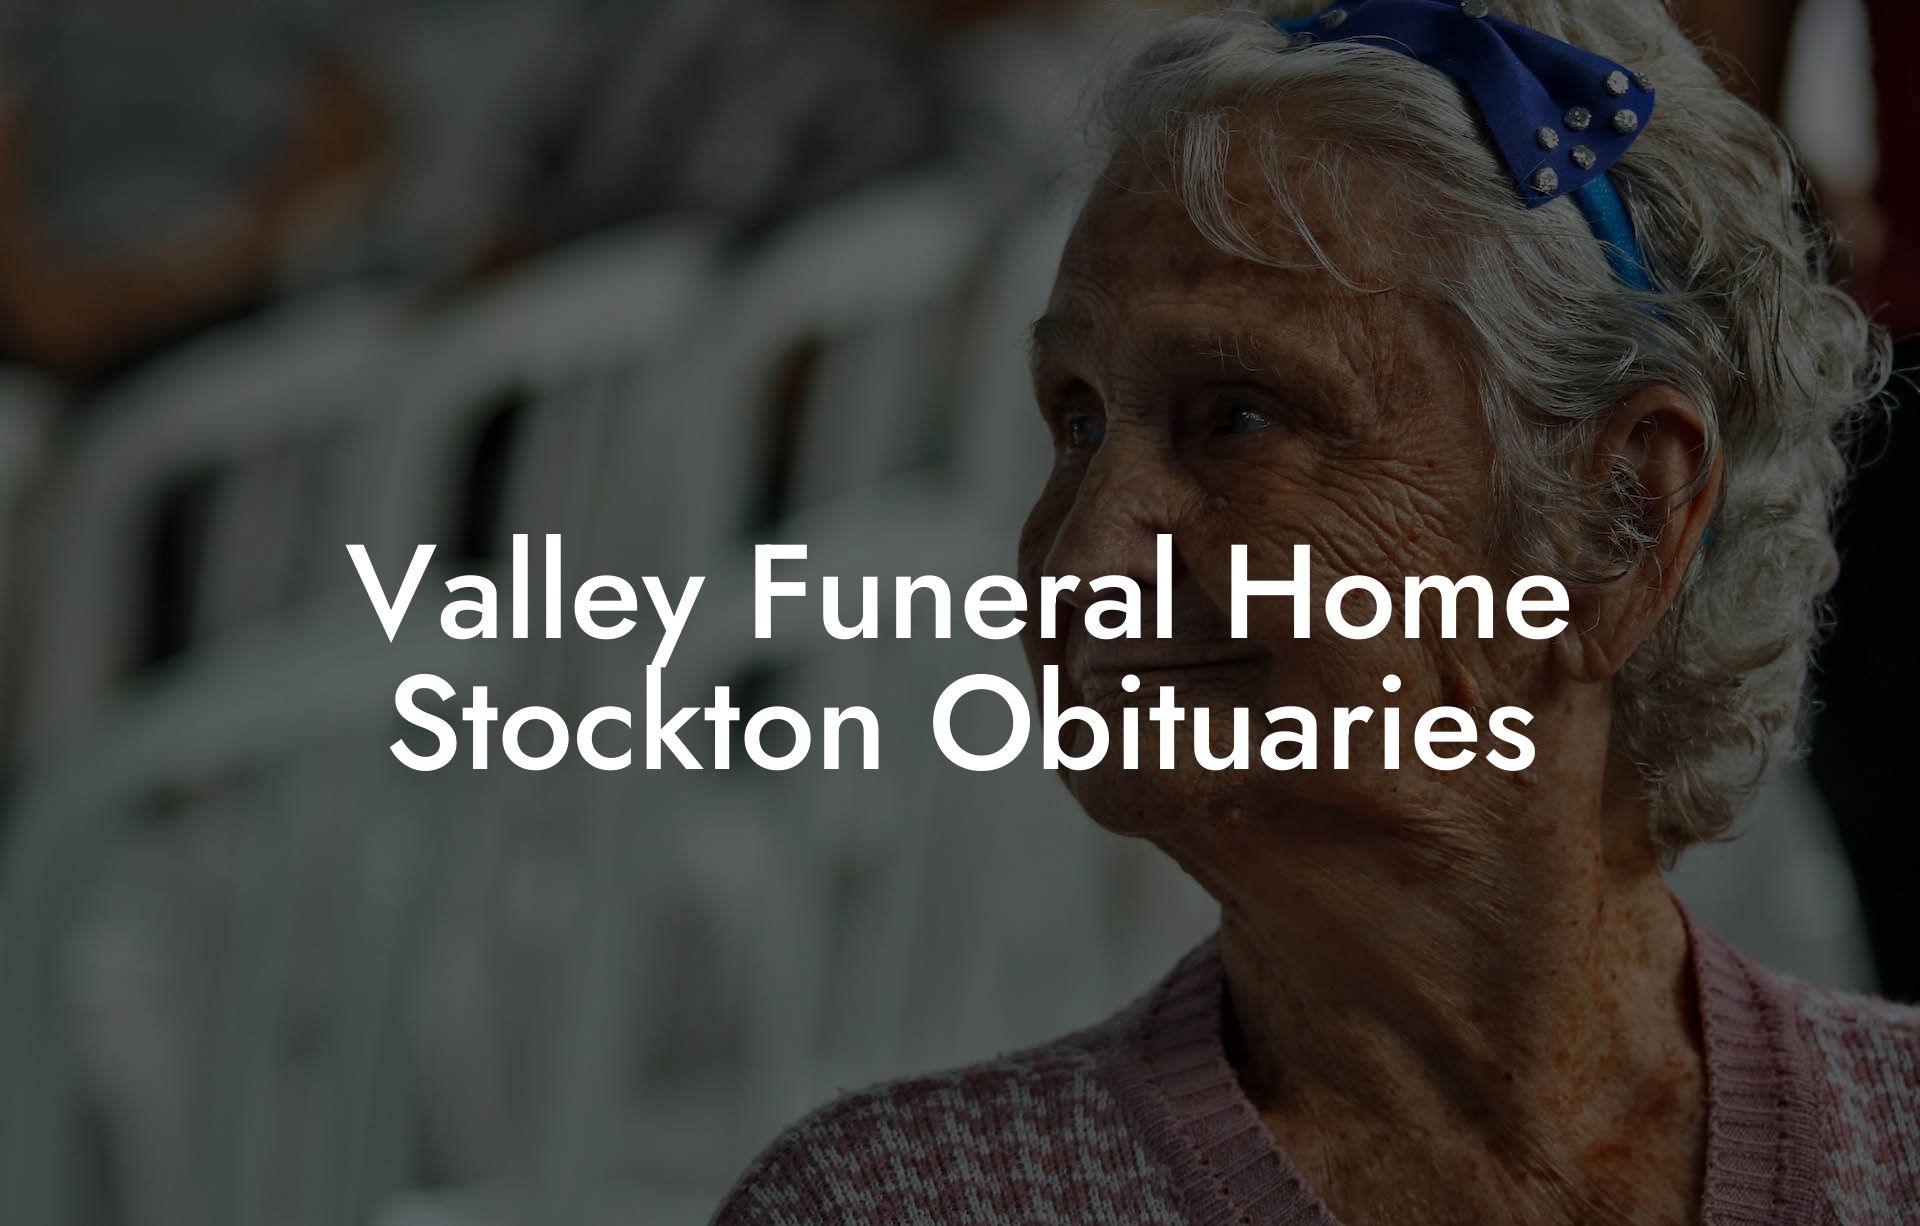 Valley Funeral Home Stockton Obituaries